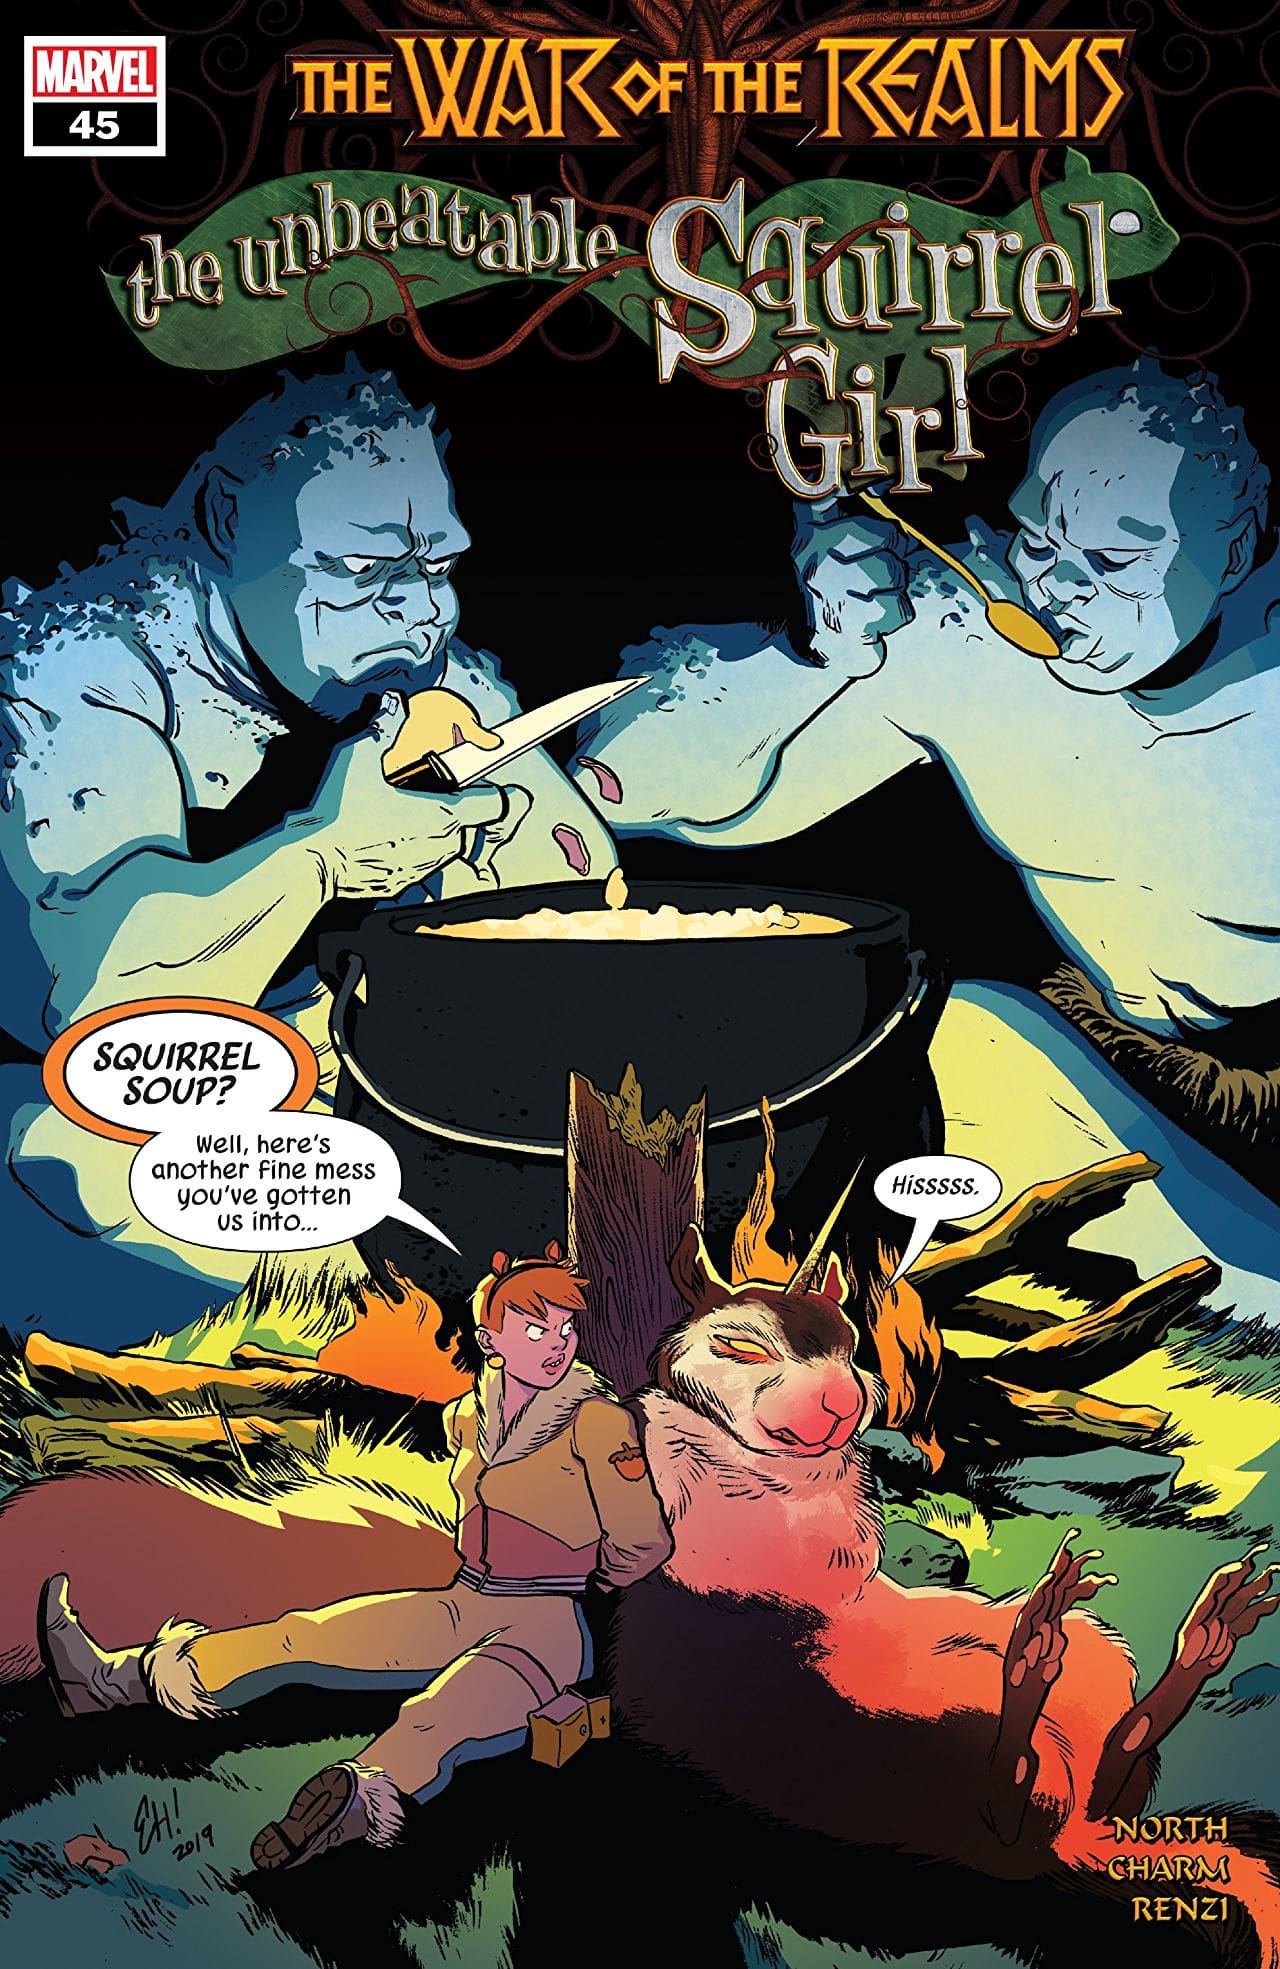 Unbeatable Squirrel Girl #45 review: The darkest evening of the year